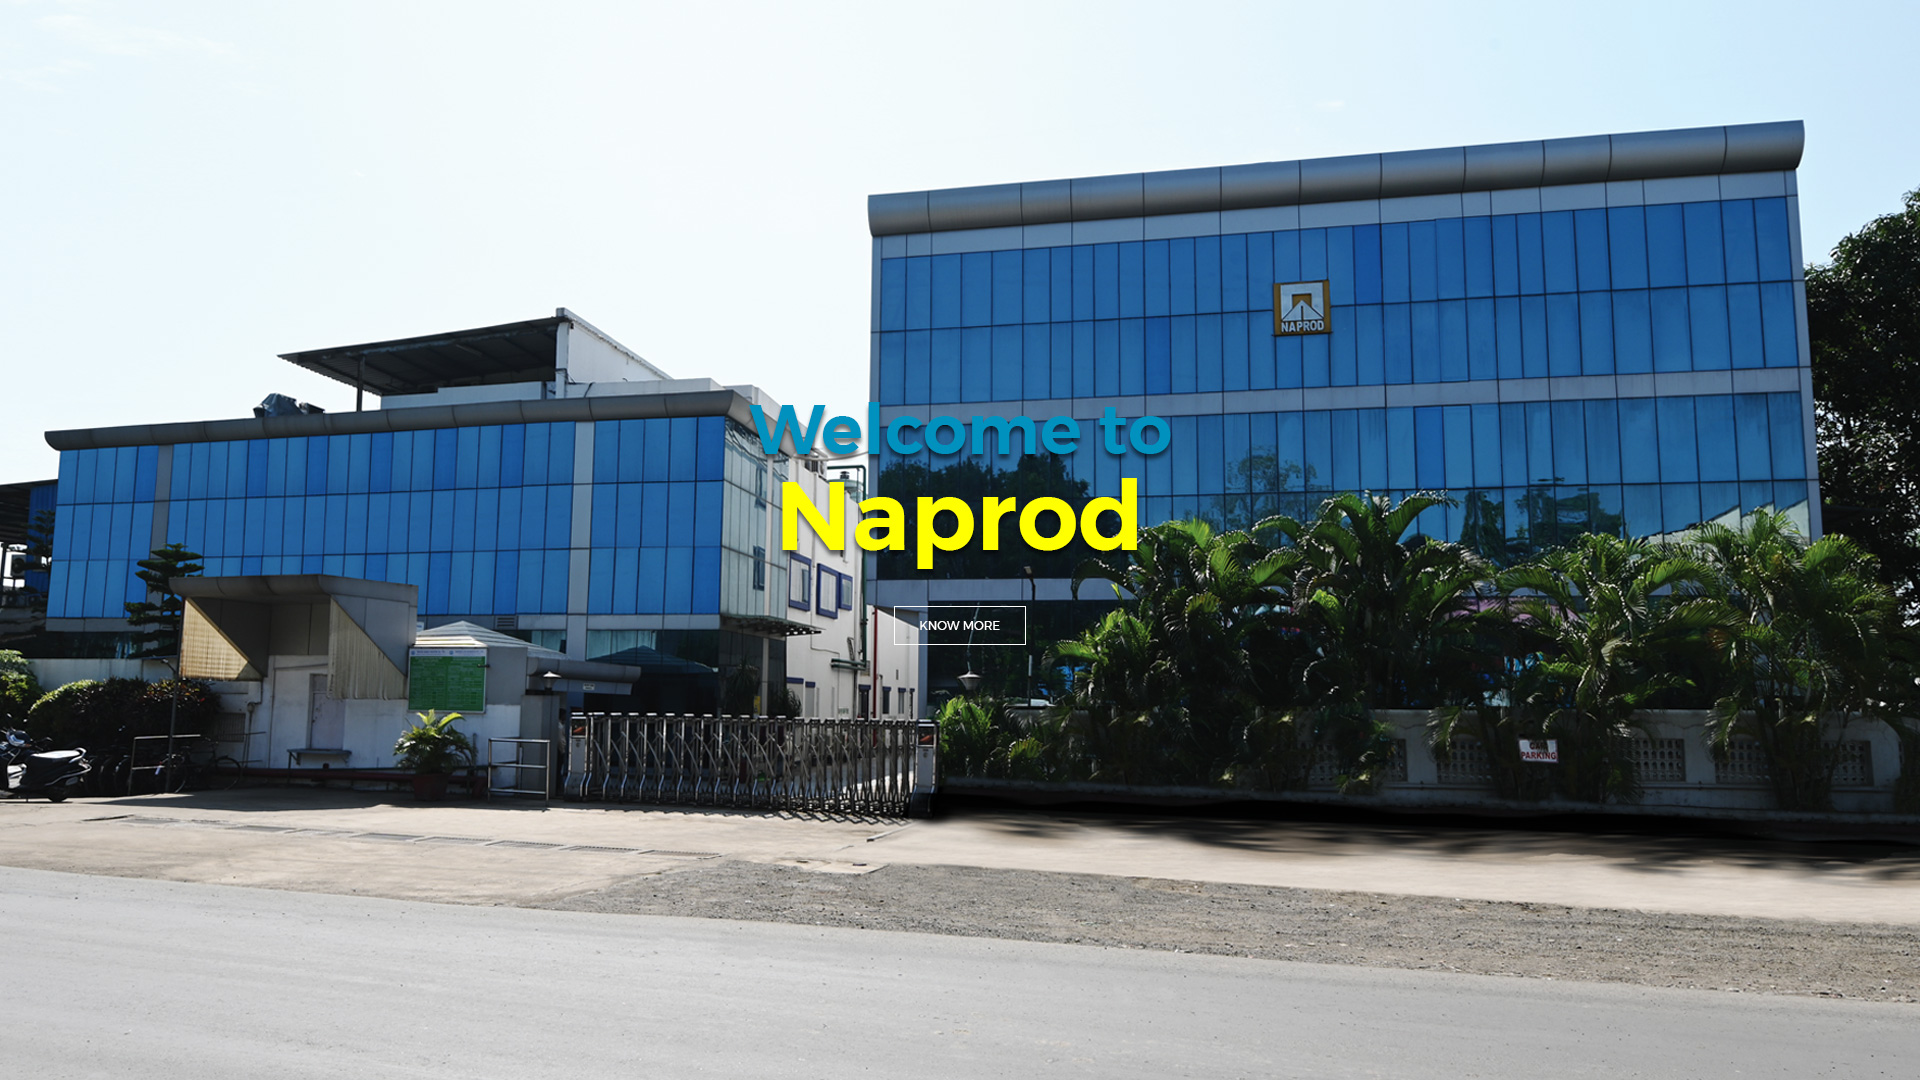 Welcome to Naprod